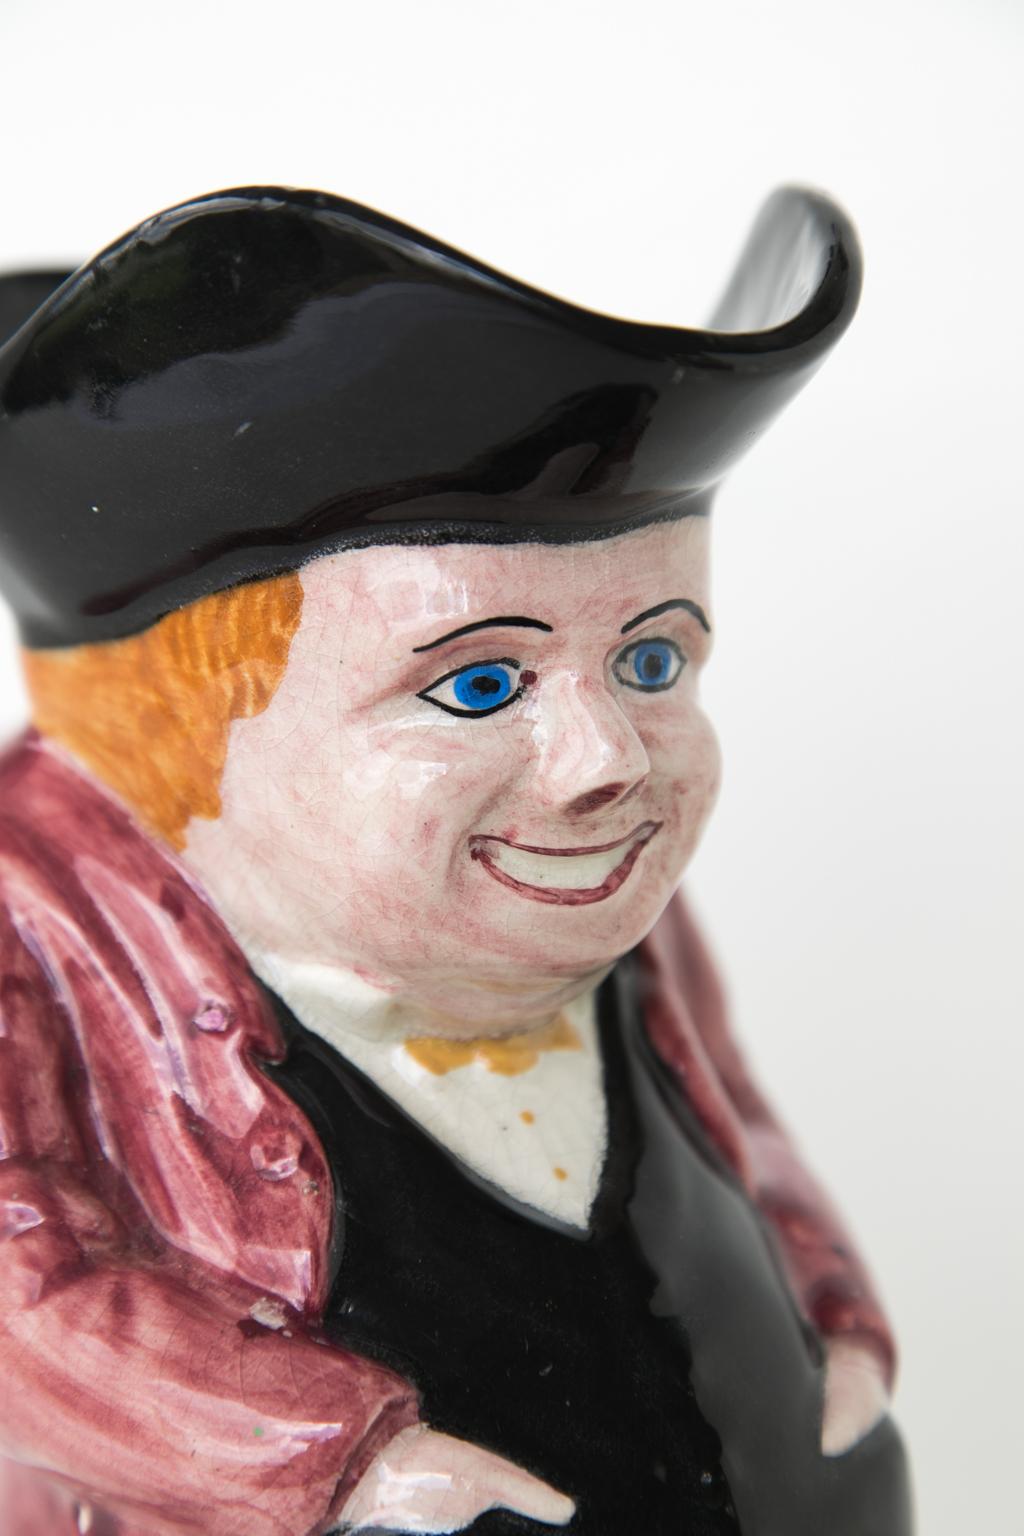 English happy Toby jug, with his hands in his pockets and a variety of colors.